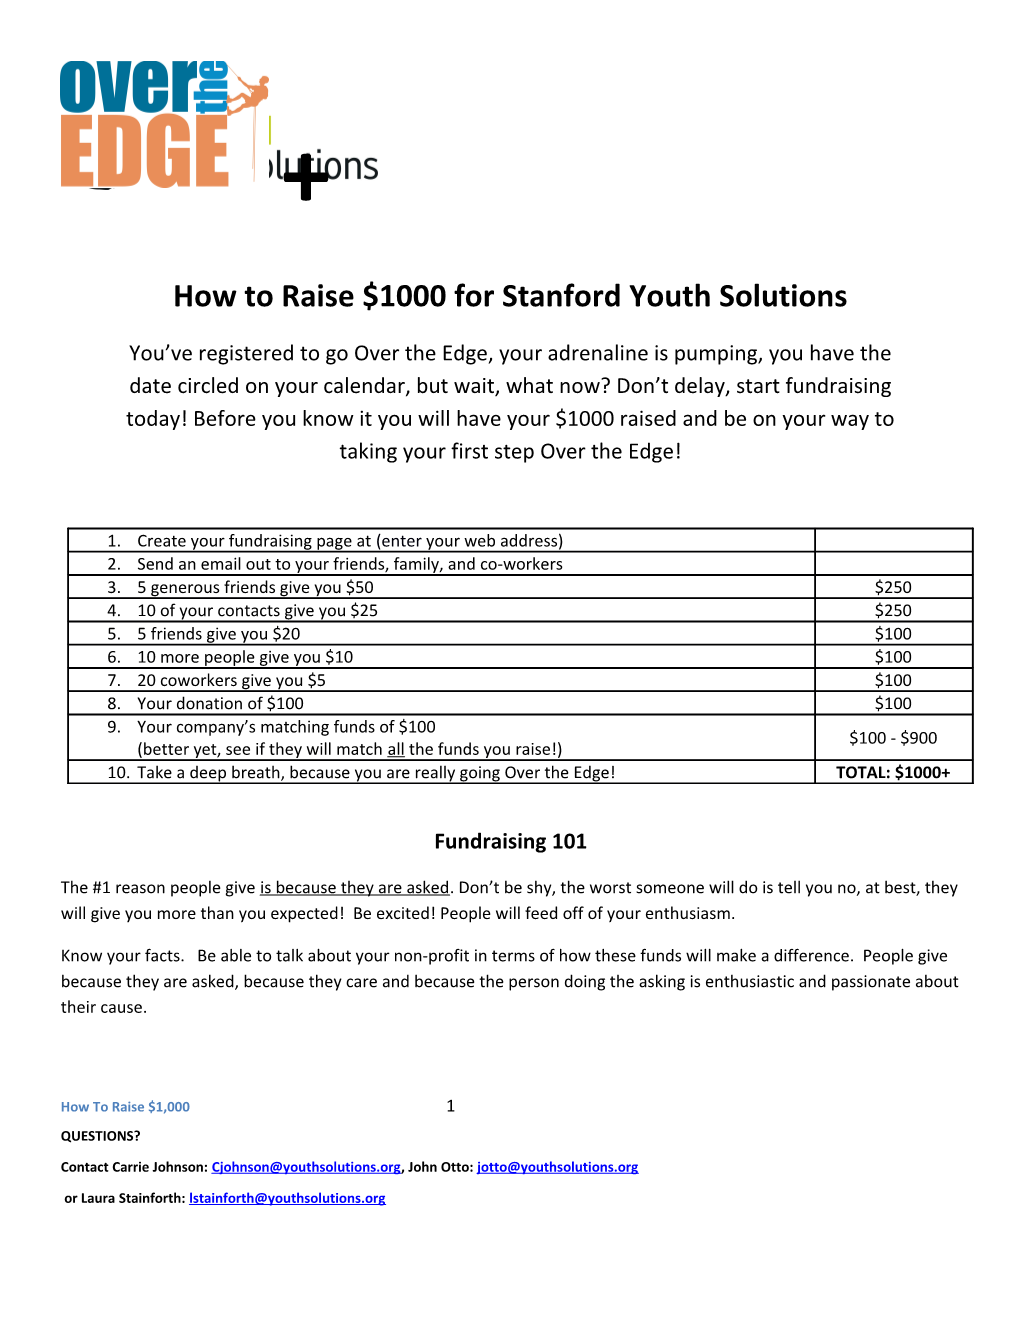 How to Raise $1000 for Stanford Youth Solutions